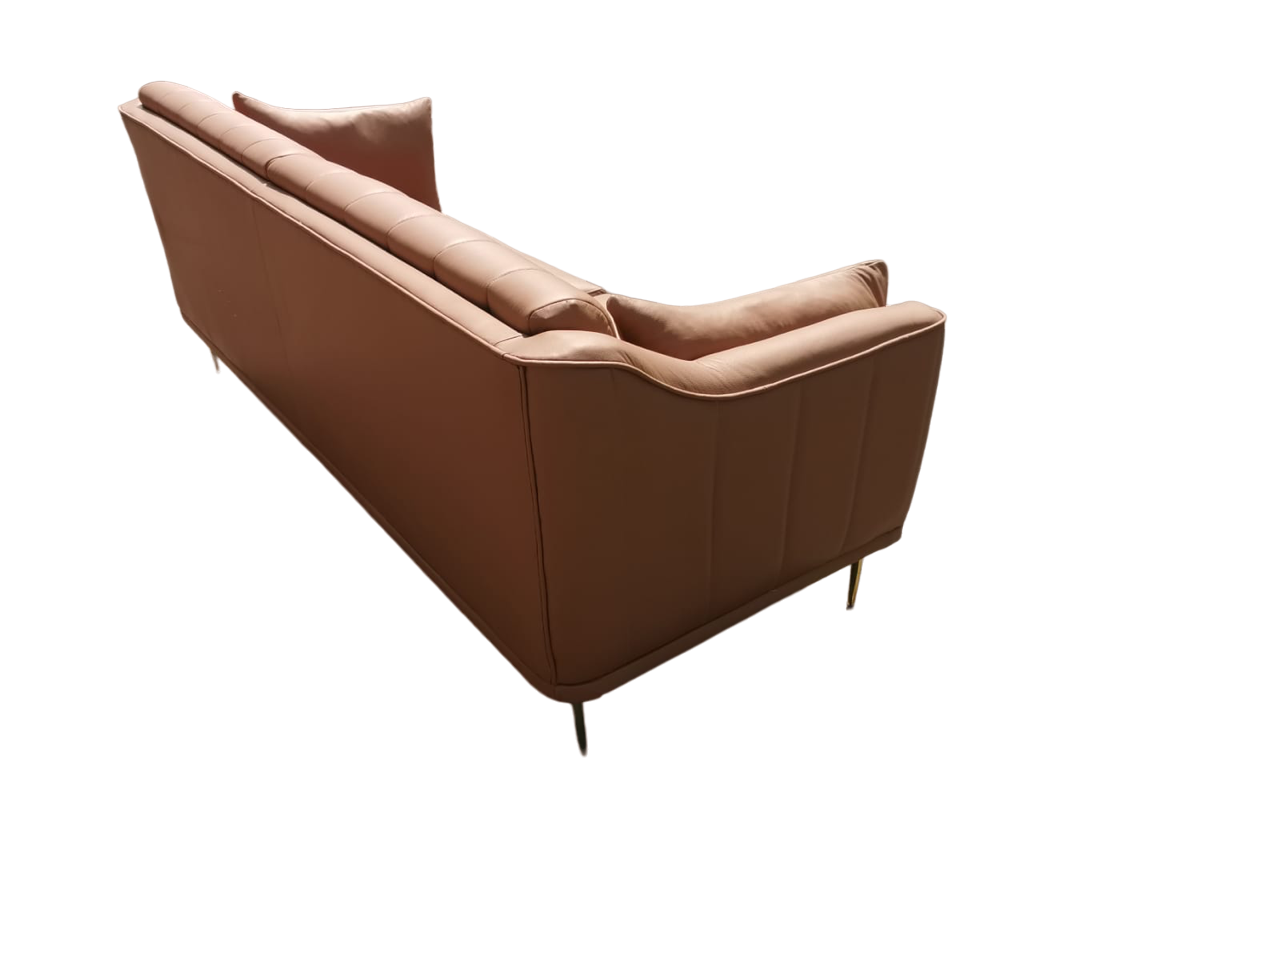 Londres brown leather 3 seater couch